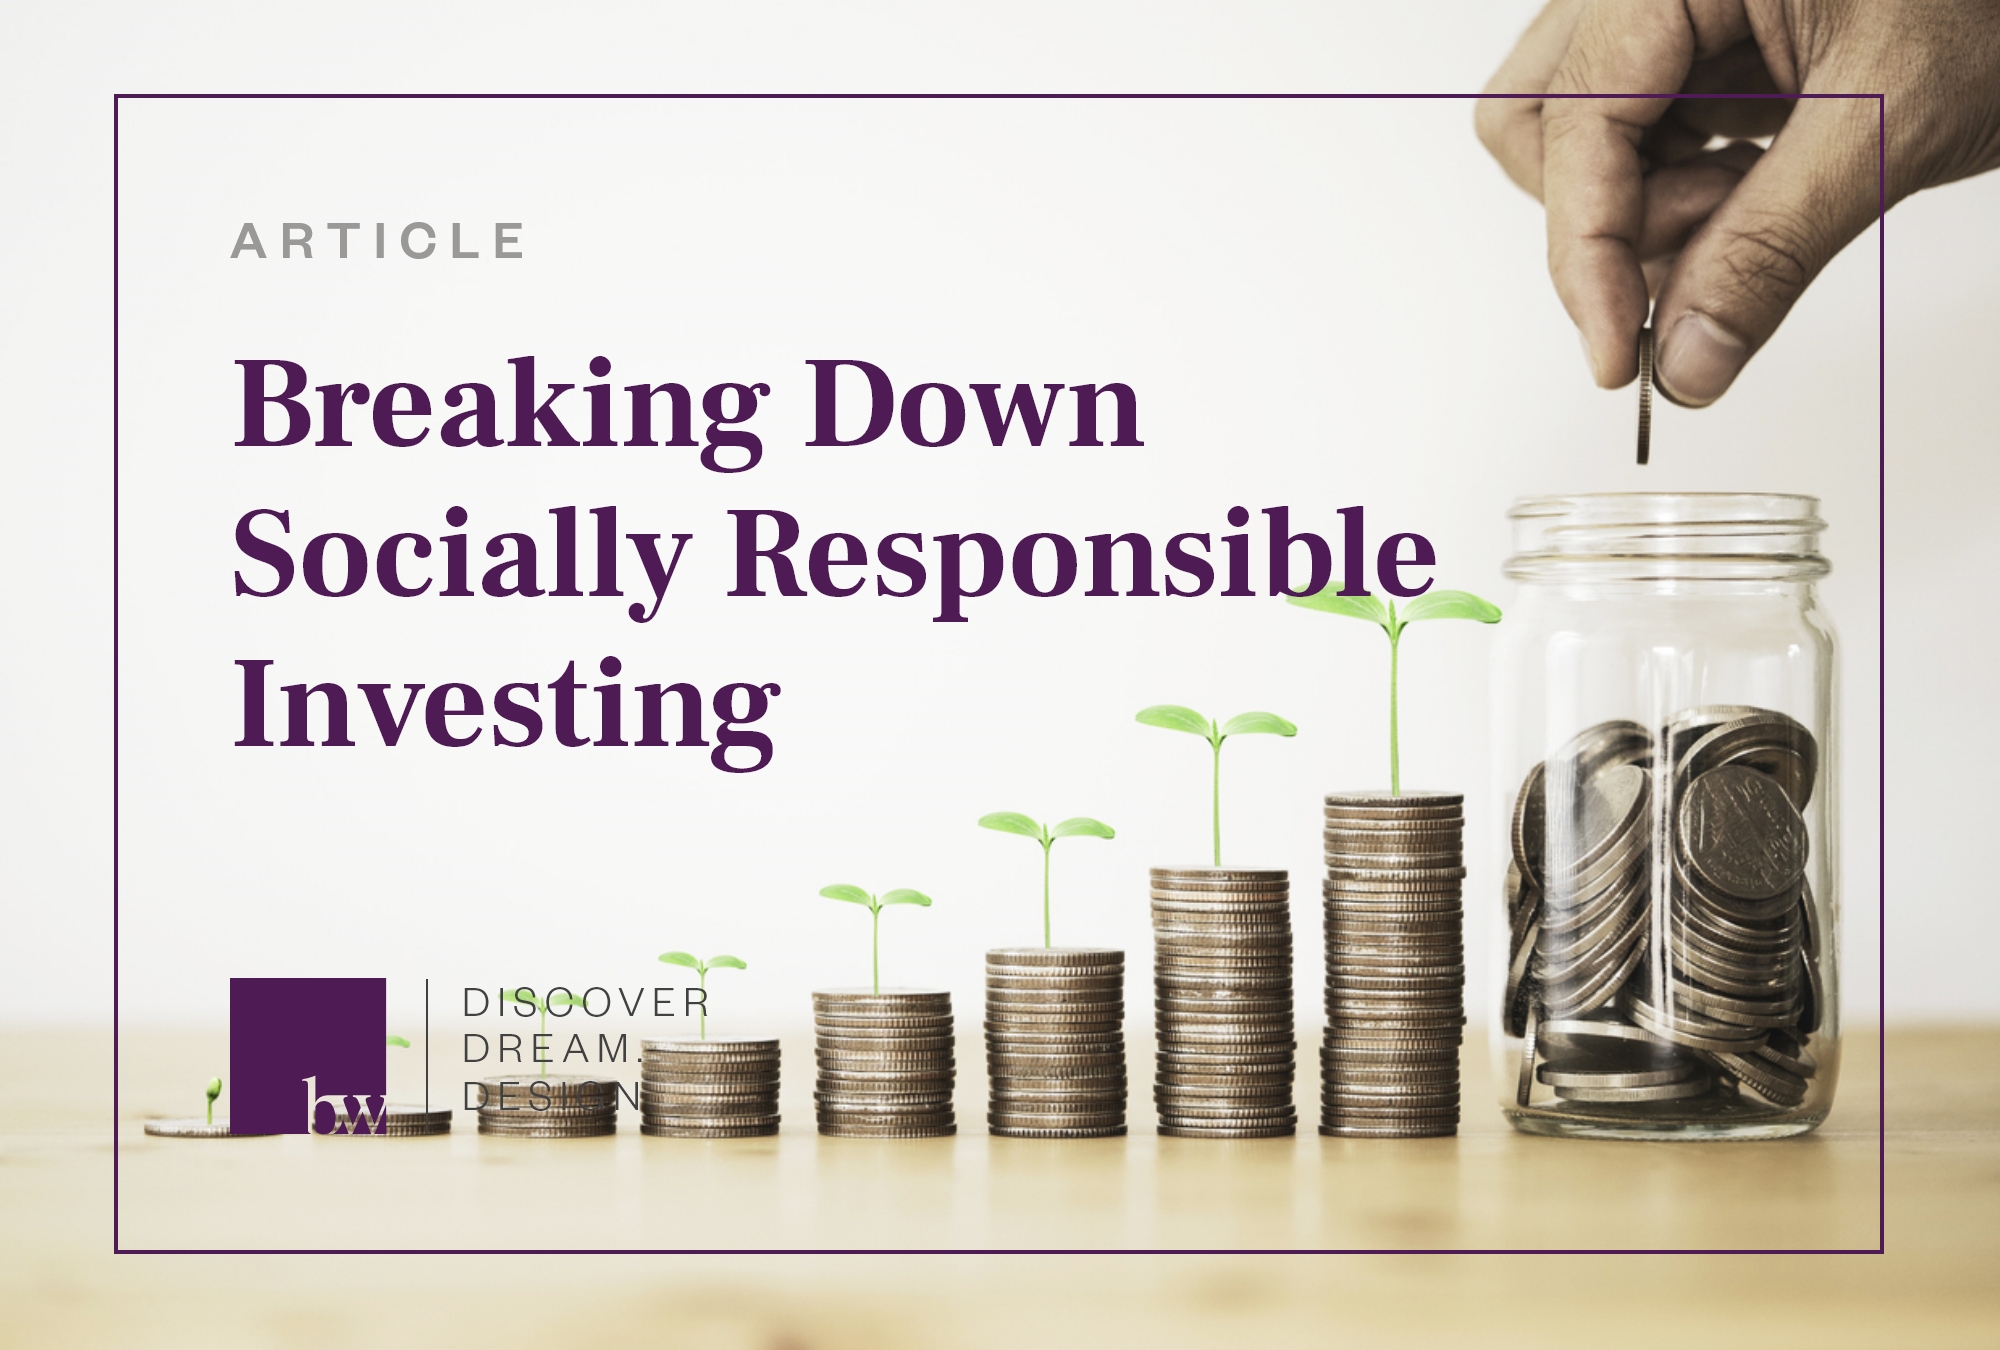 Investing in socially responsible large-cap value stocks